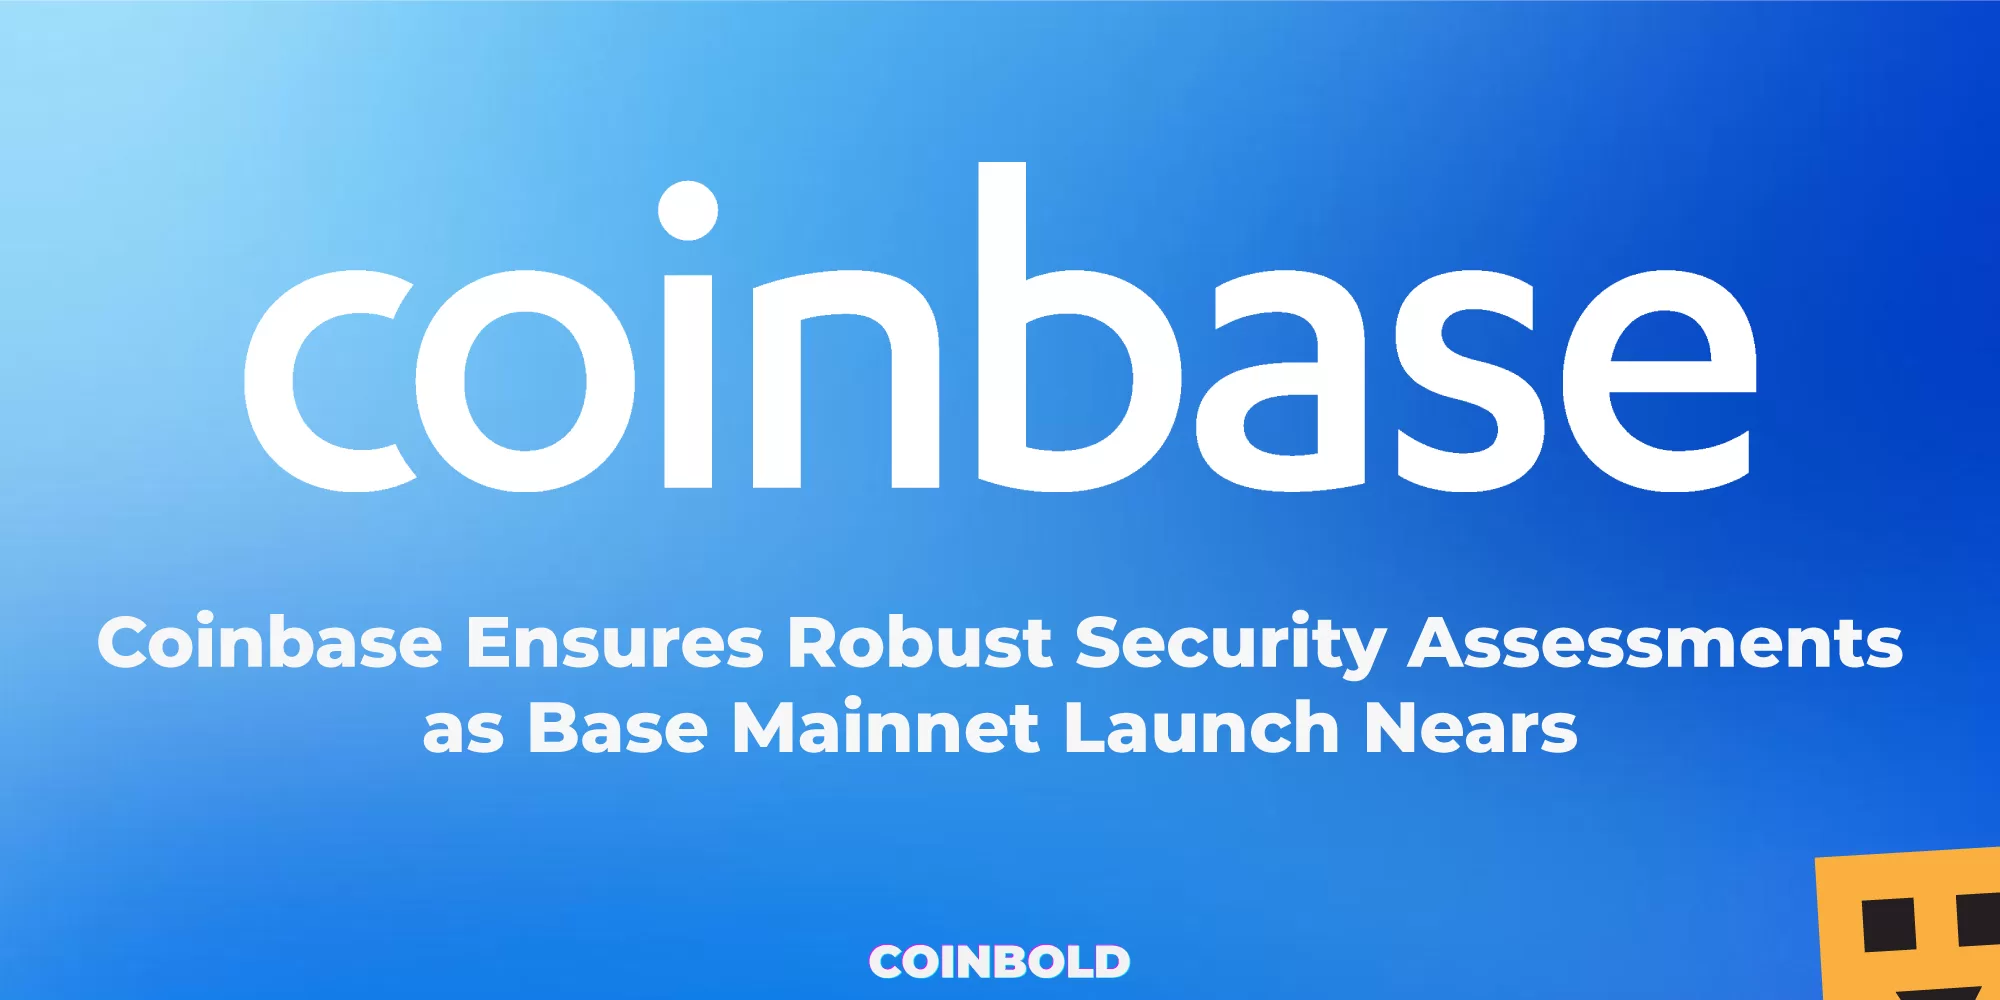 Coinbase Ensures Robust Security Assessments as Base Mainnet Launch Nears